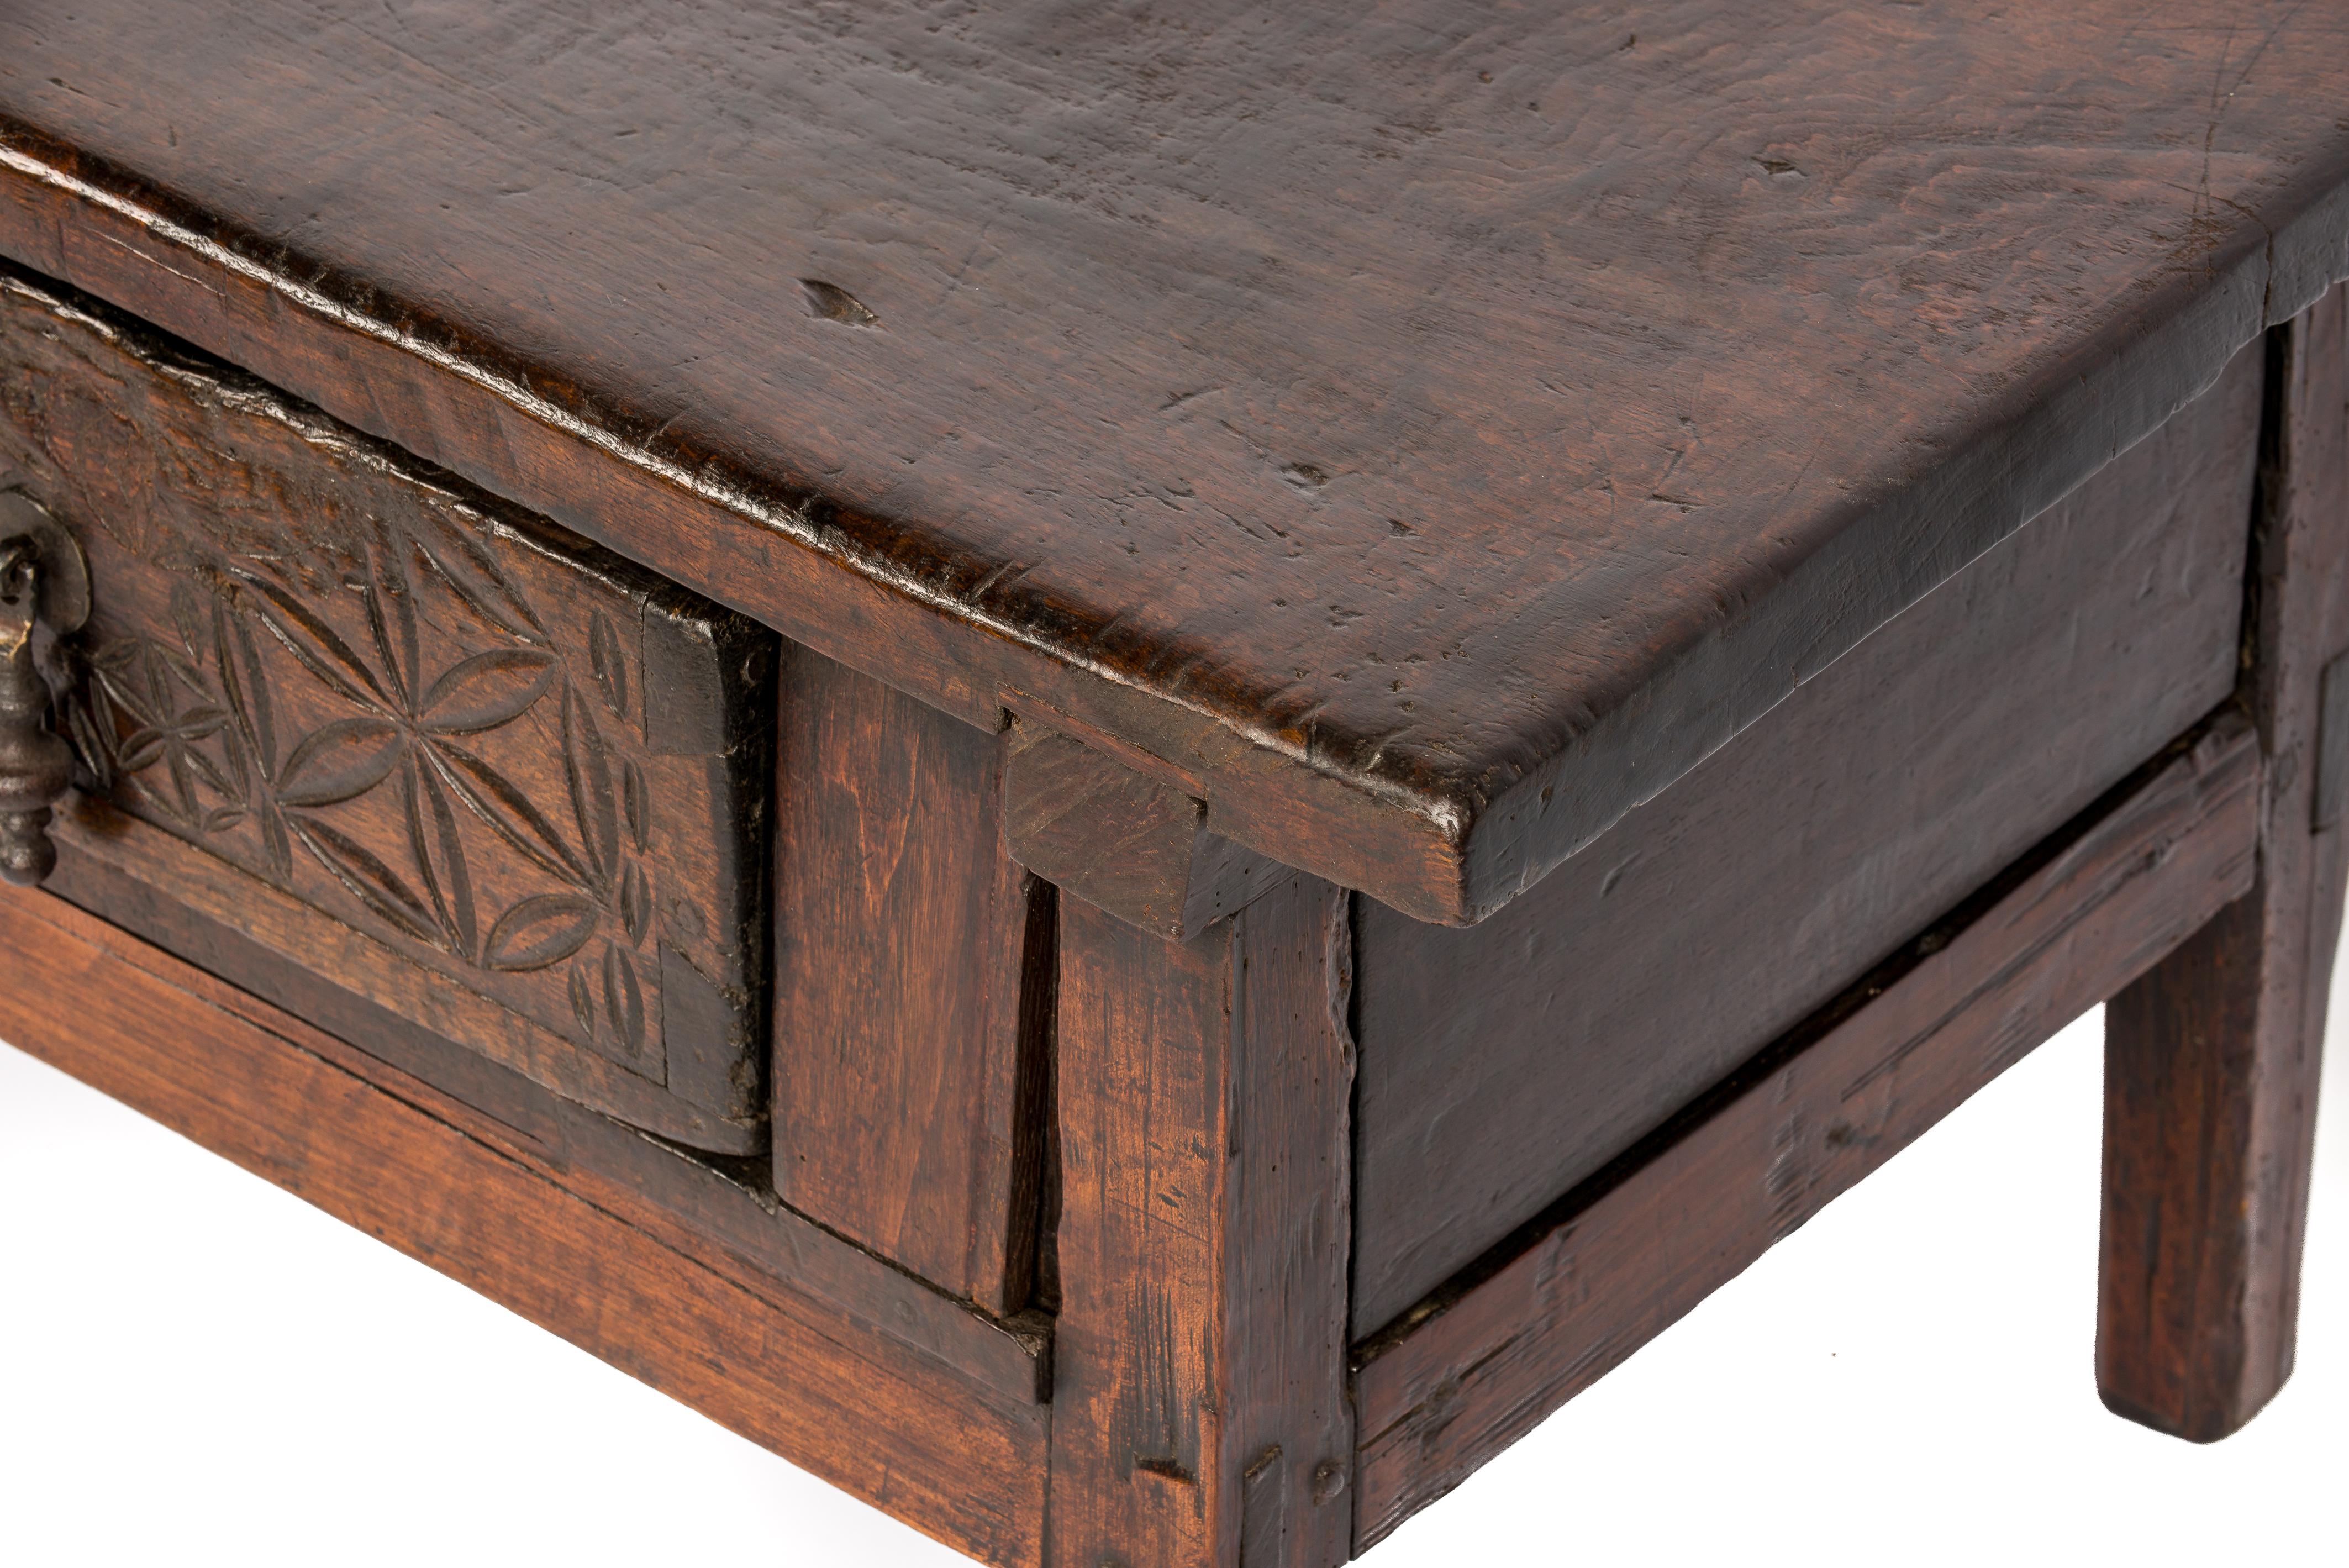 Antique 18th-Century Rustic Spanish Chestnut Coffee Table with Geometric Carving 4